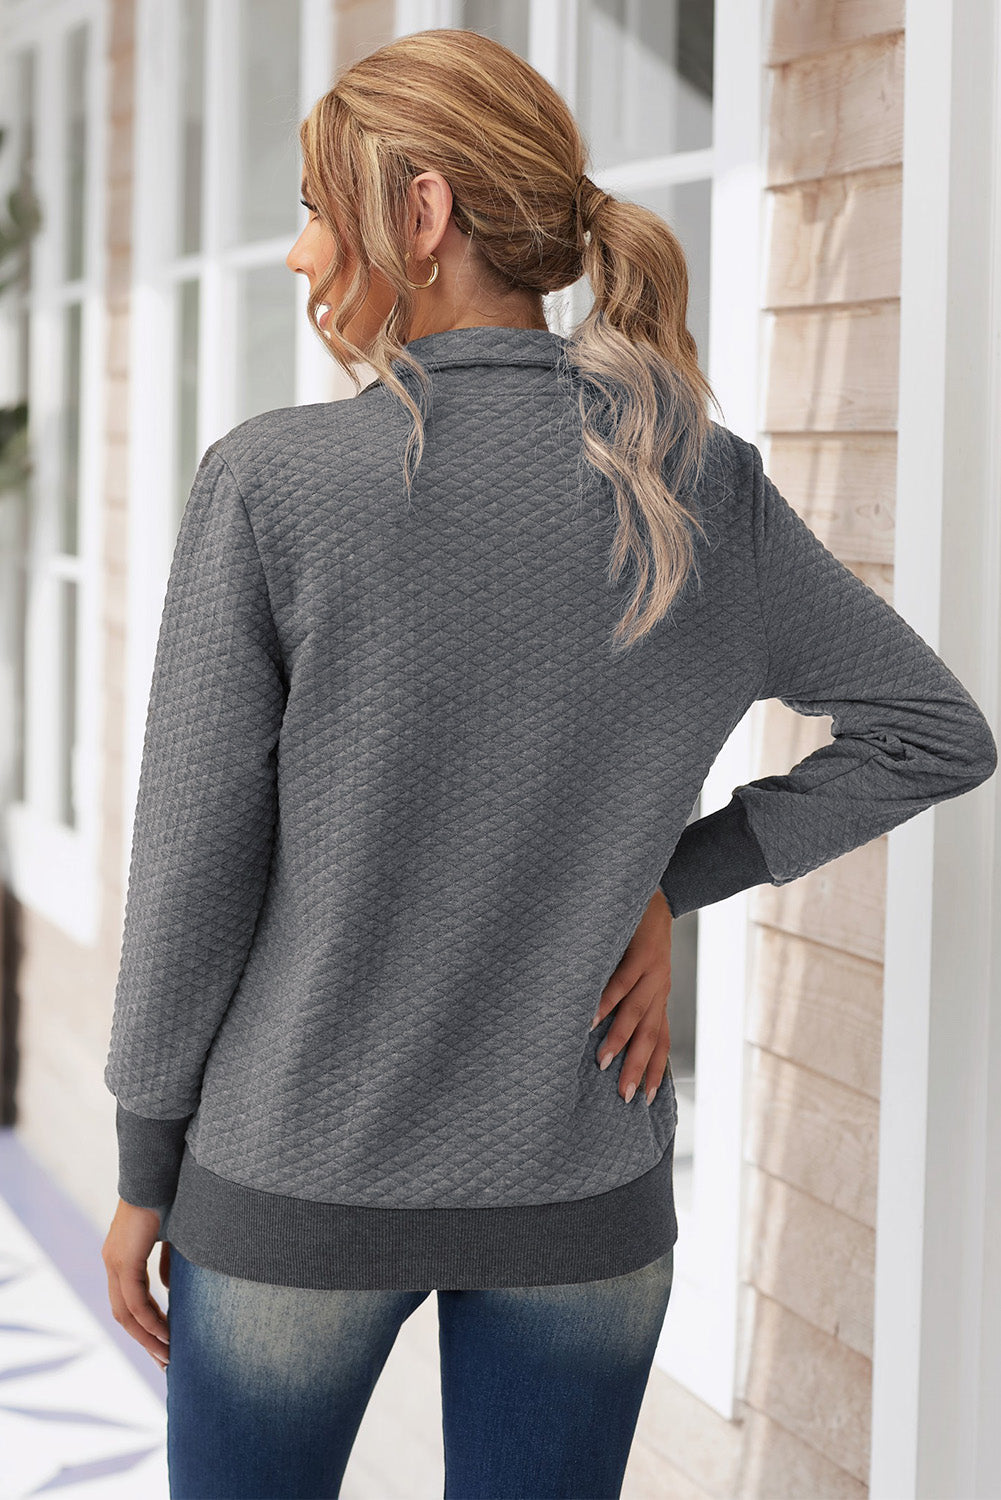 Collared Neck Long Sleeve Top - Women’s Clothing & Accessories - Shirts & Tops - 2 - 2024